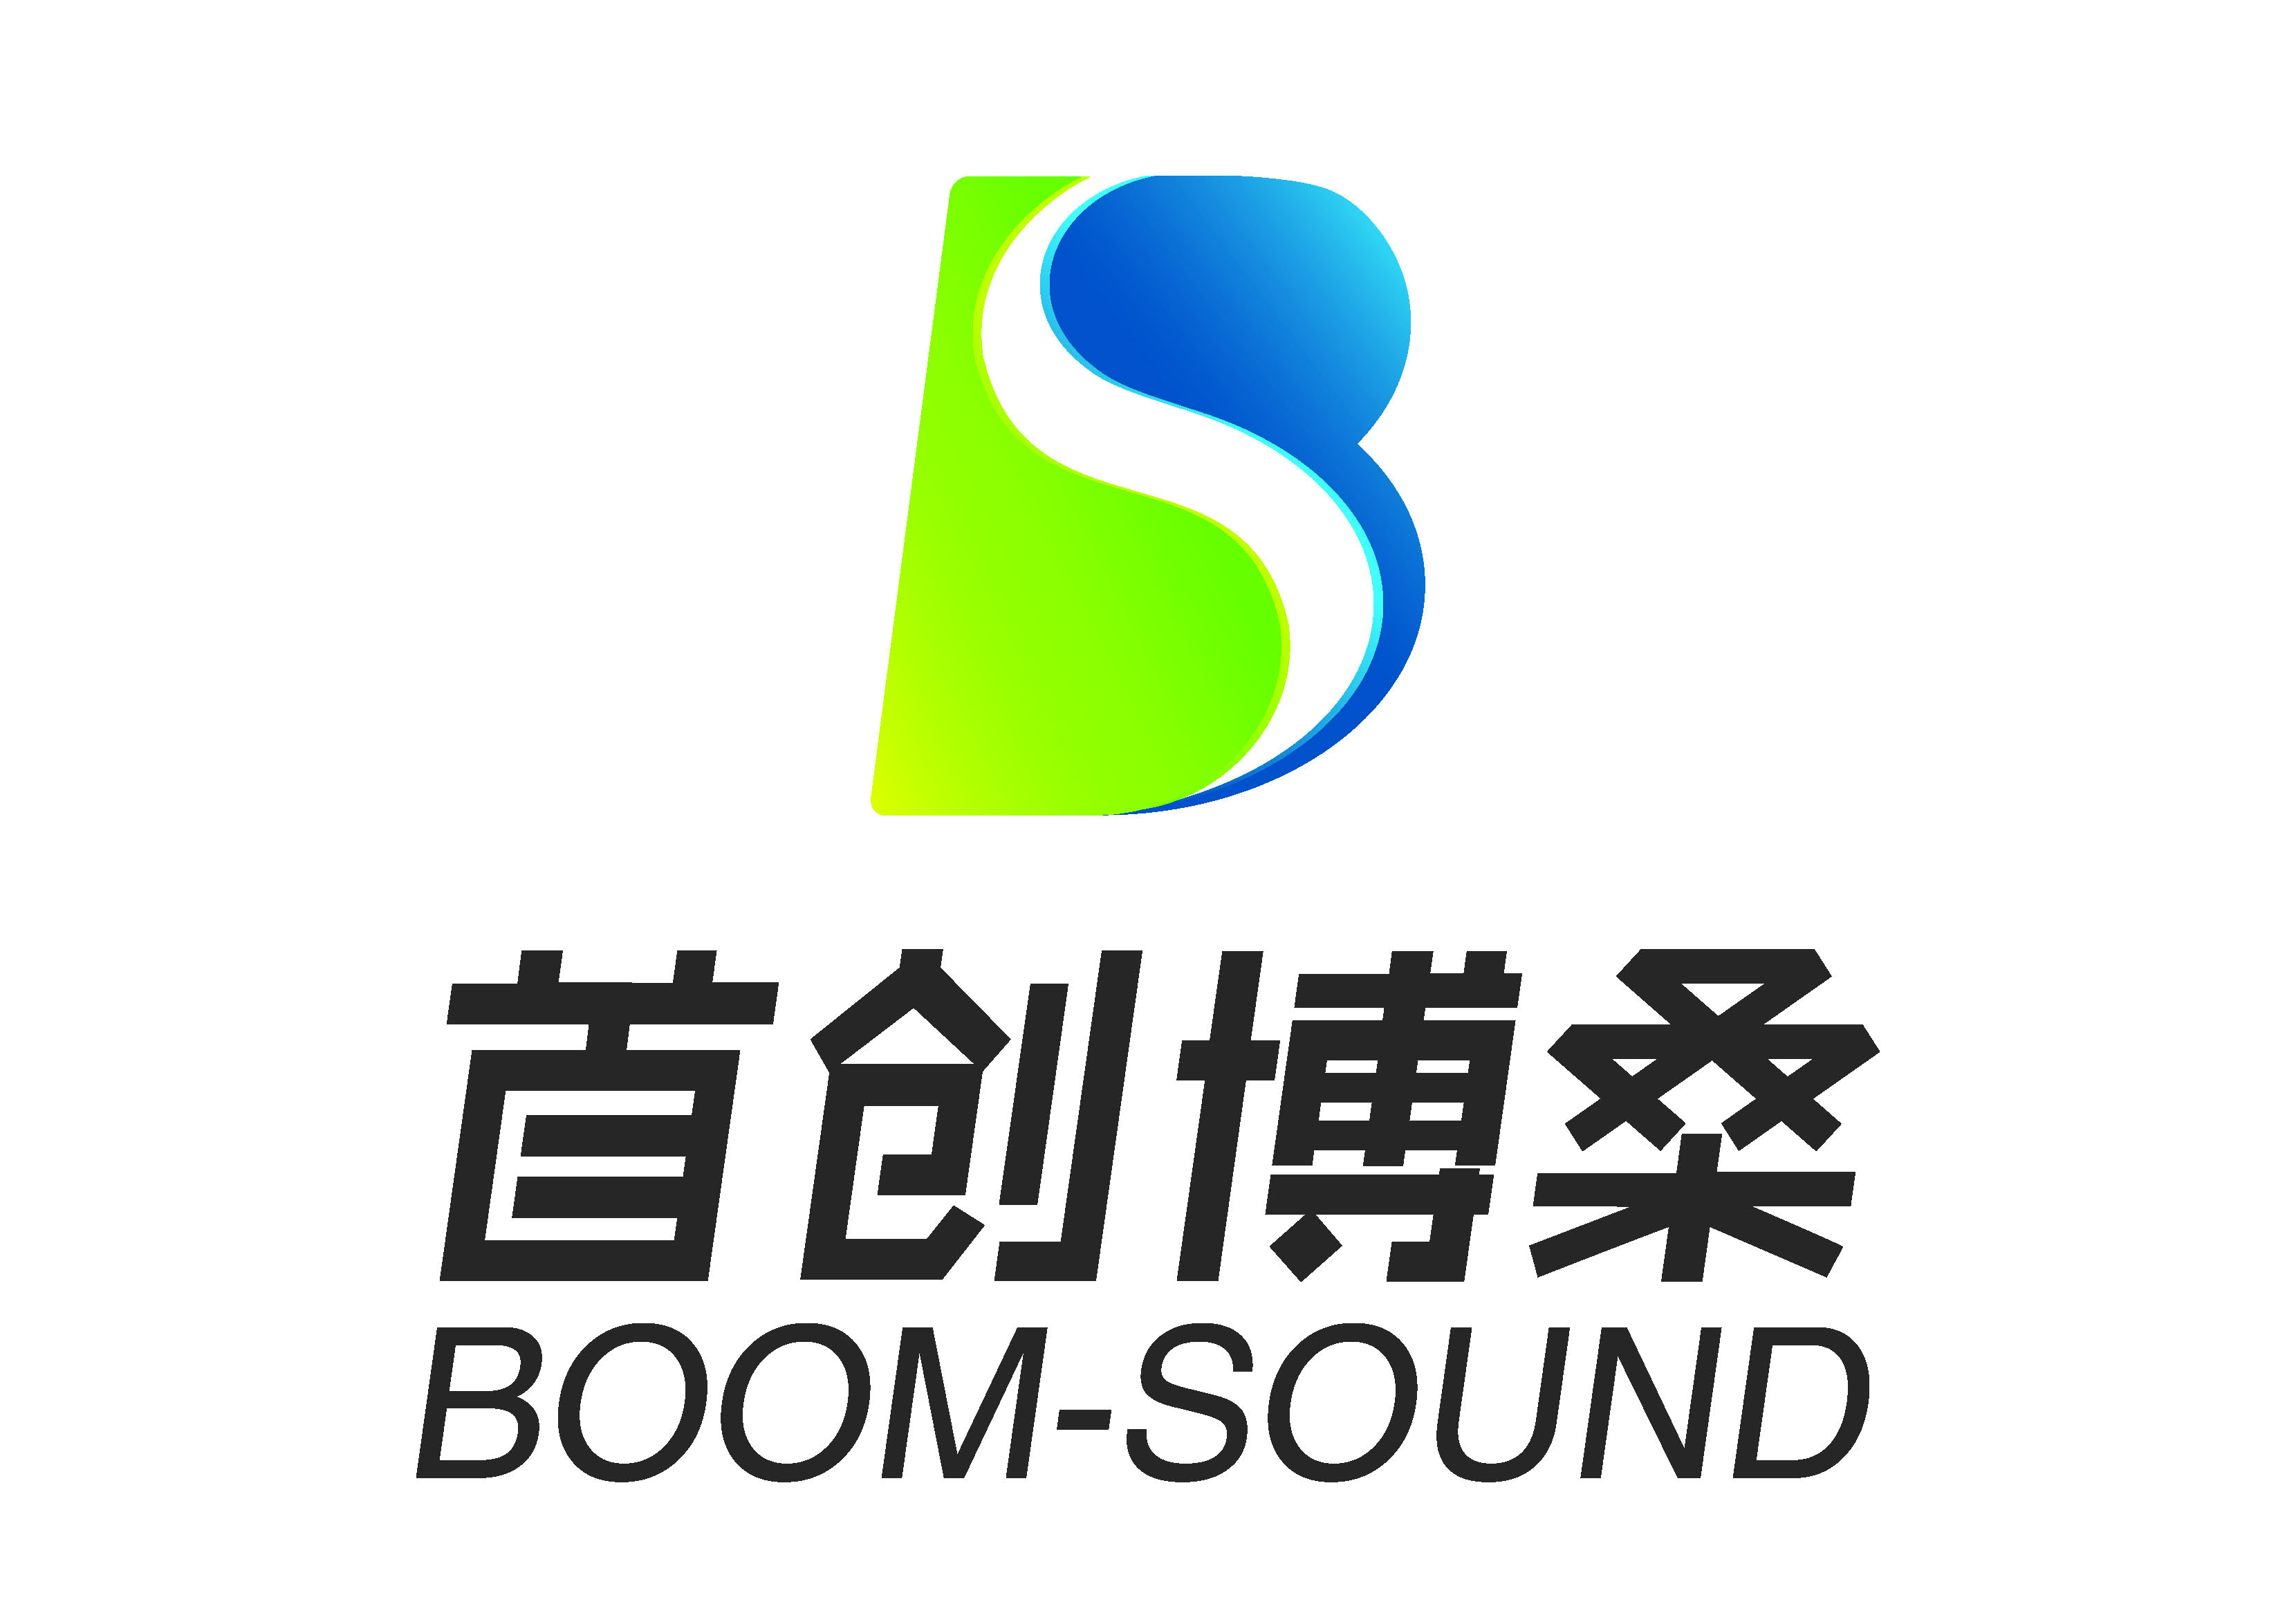 BEIJING CAPITAL GROUP BOOM-SOUND ENVIRONMENT SCIENCE & TECHNOLOGY CO., LTD.